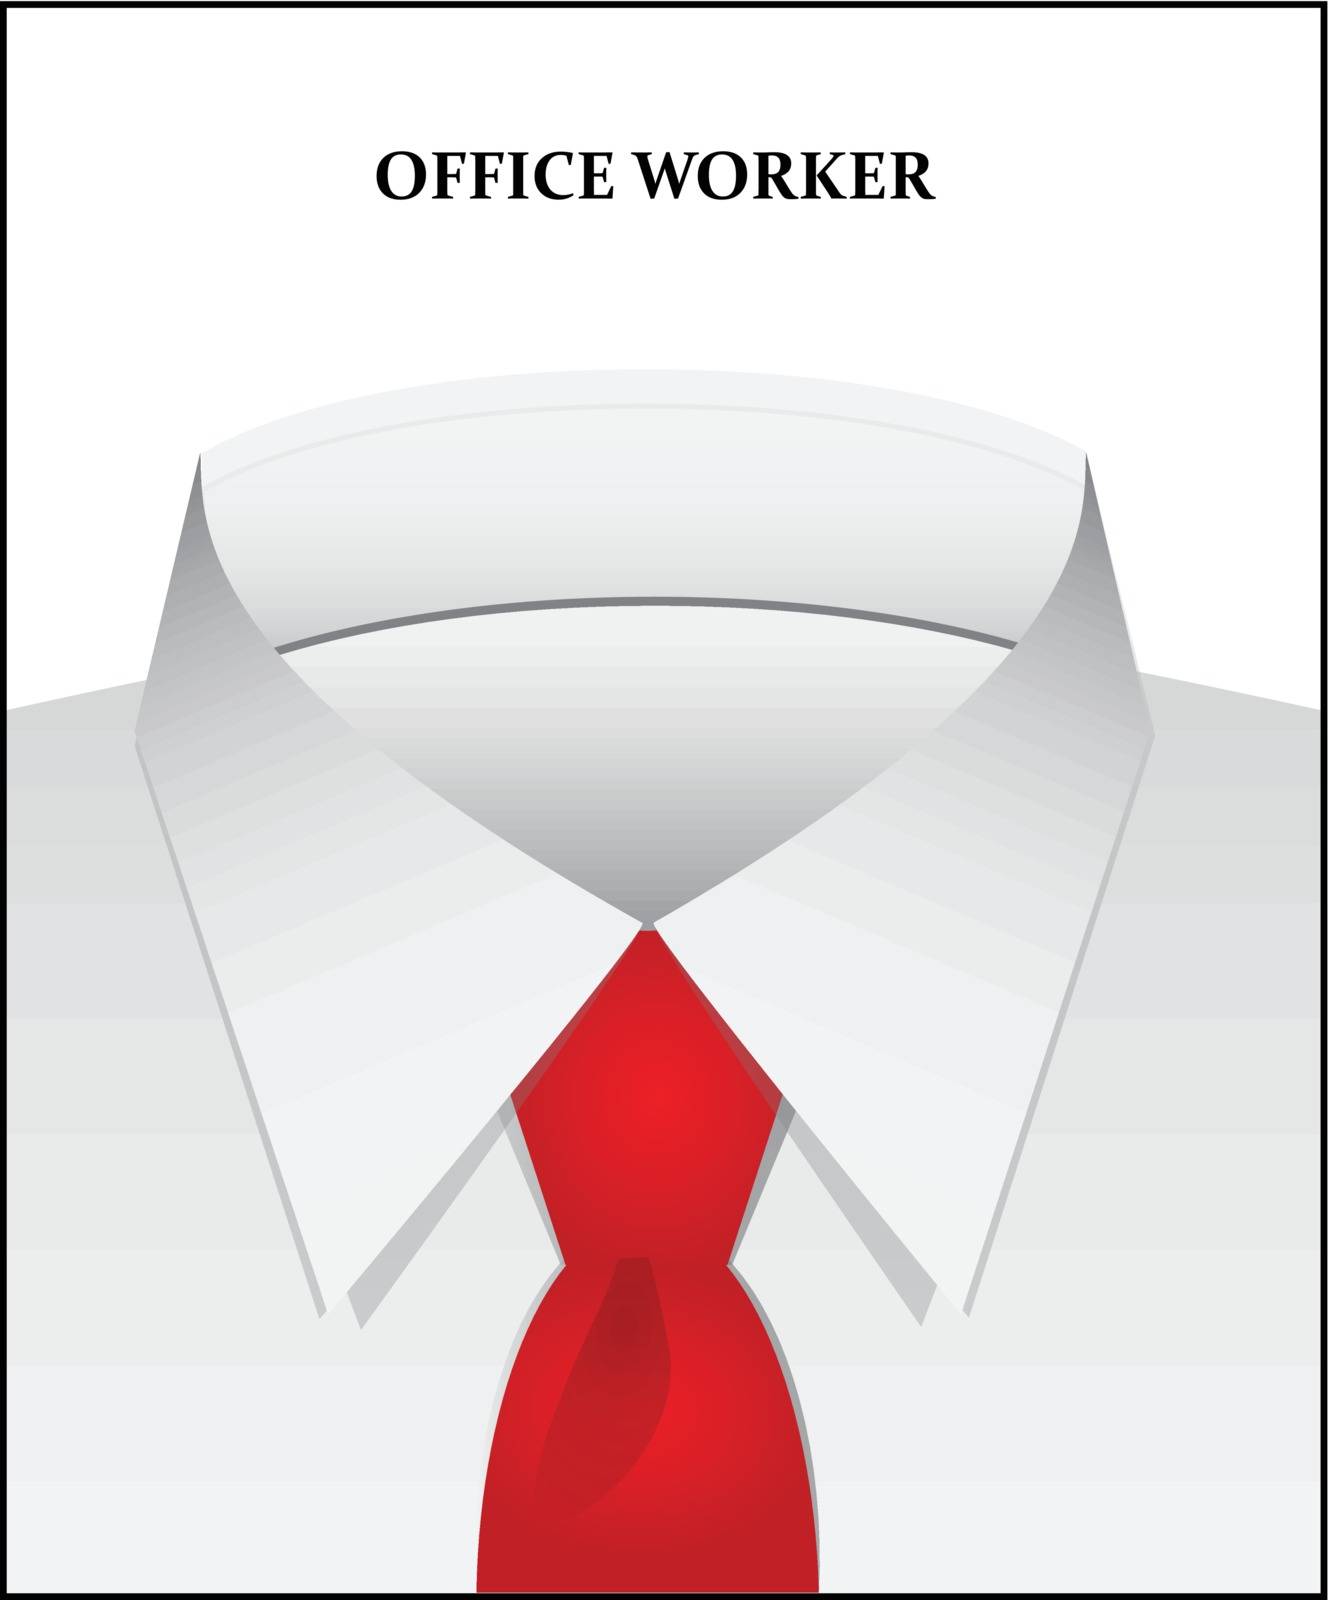 Office worker by VIPDesignUSA